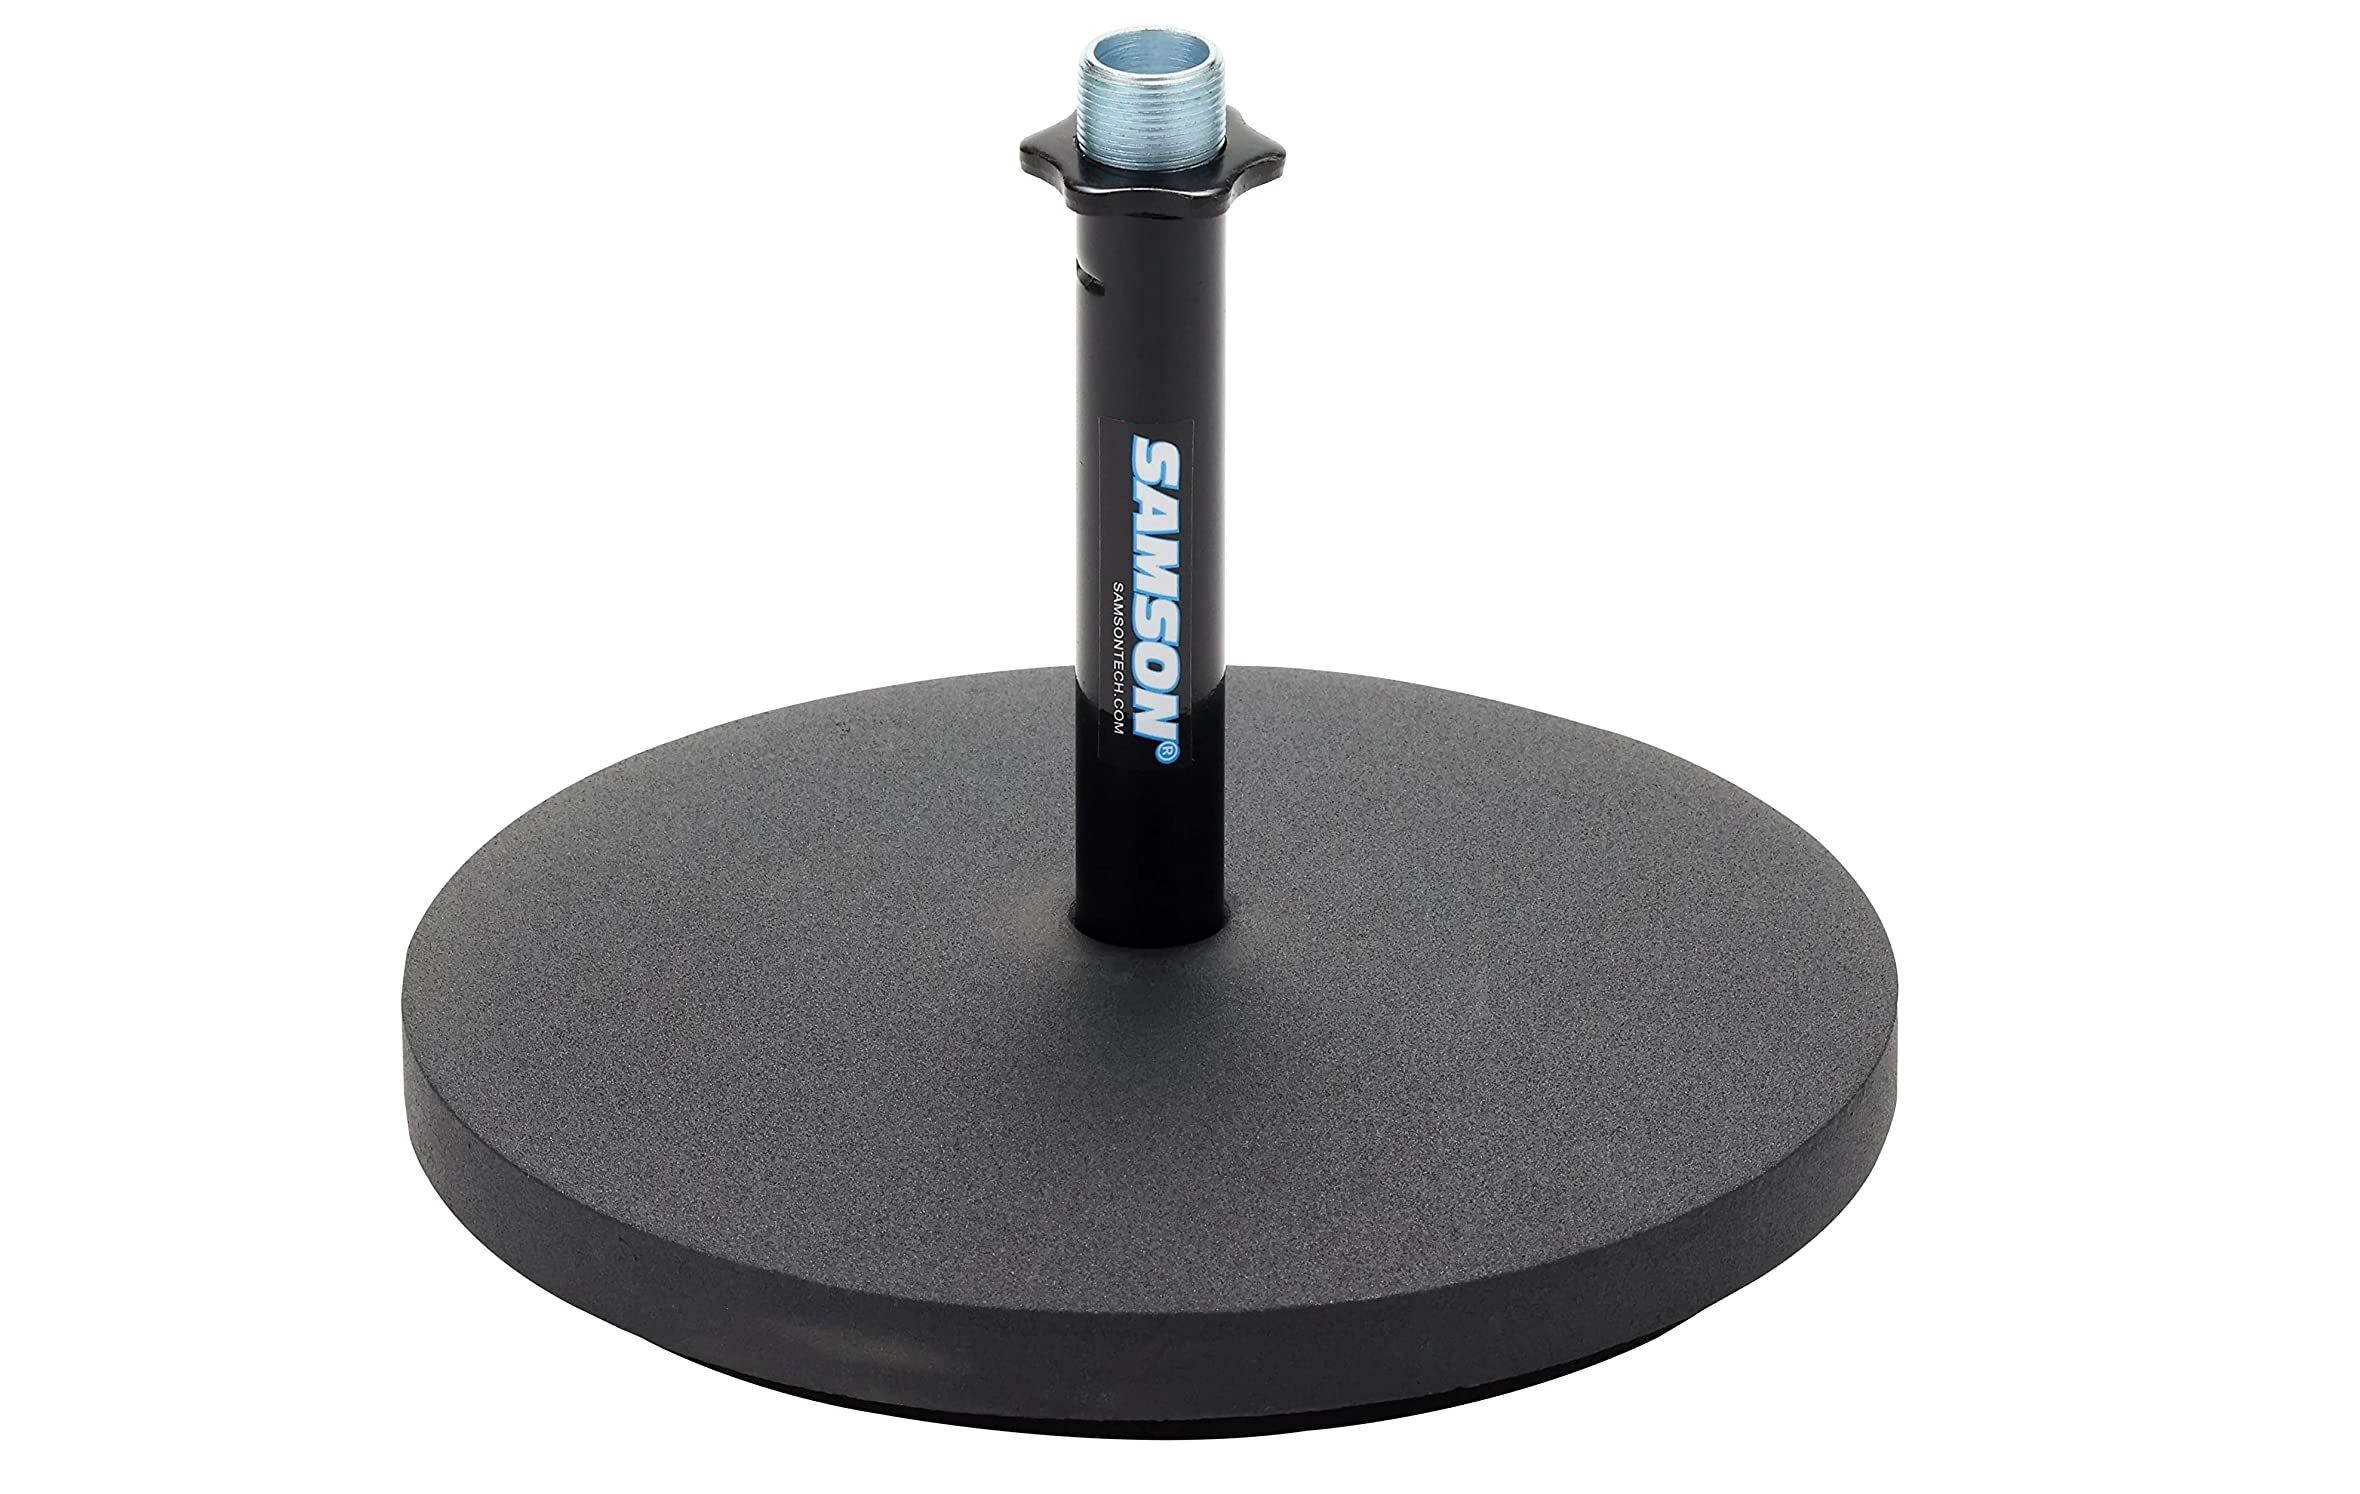 the samson md5 microphone stand featuring a metal base